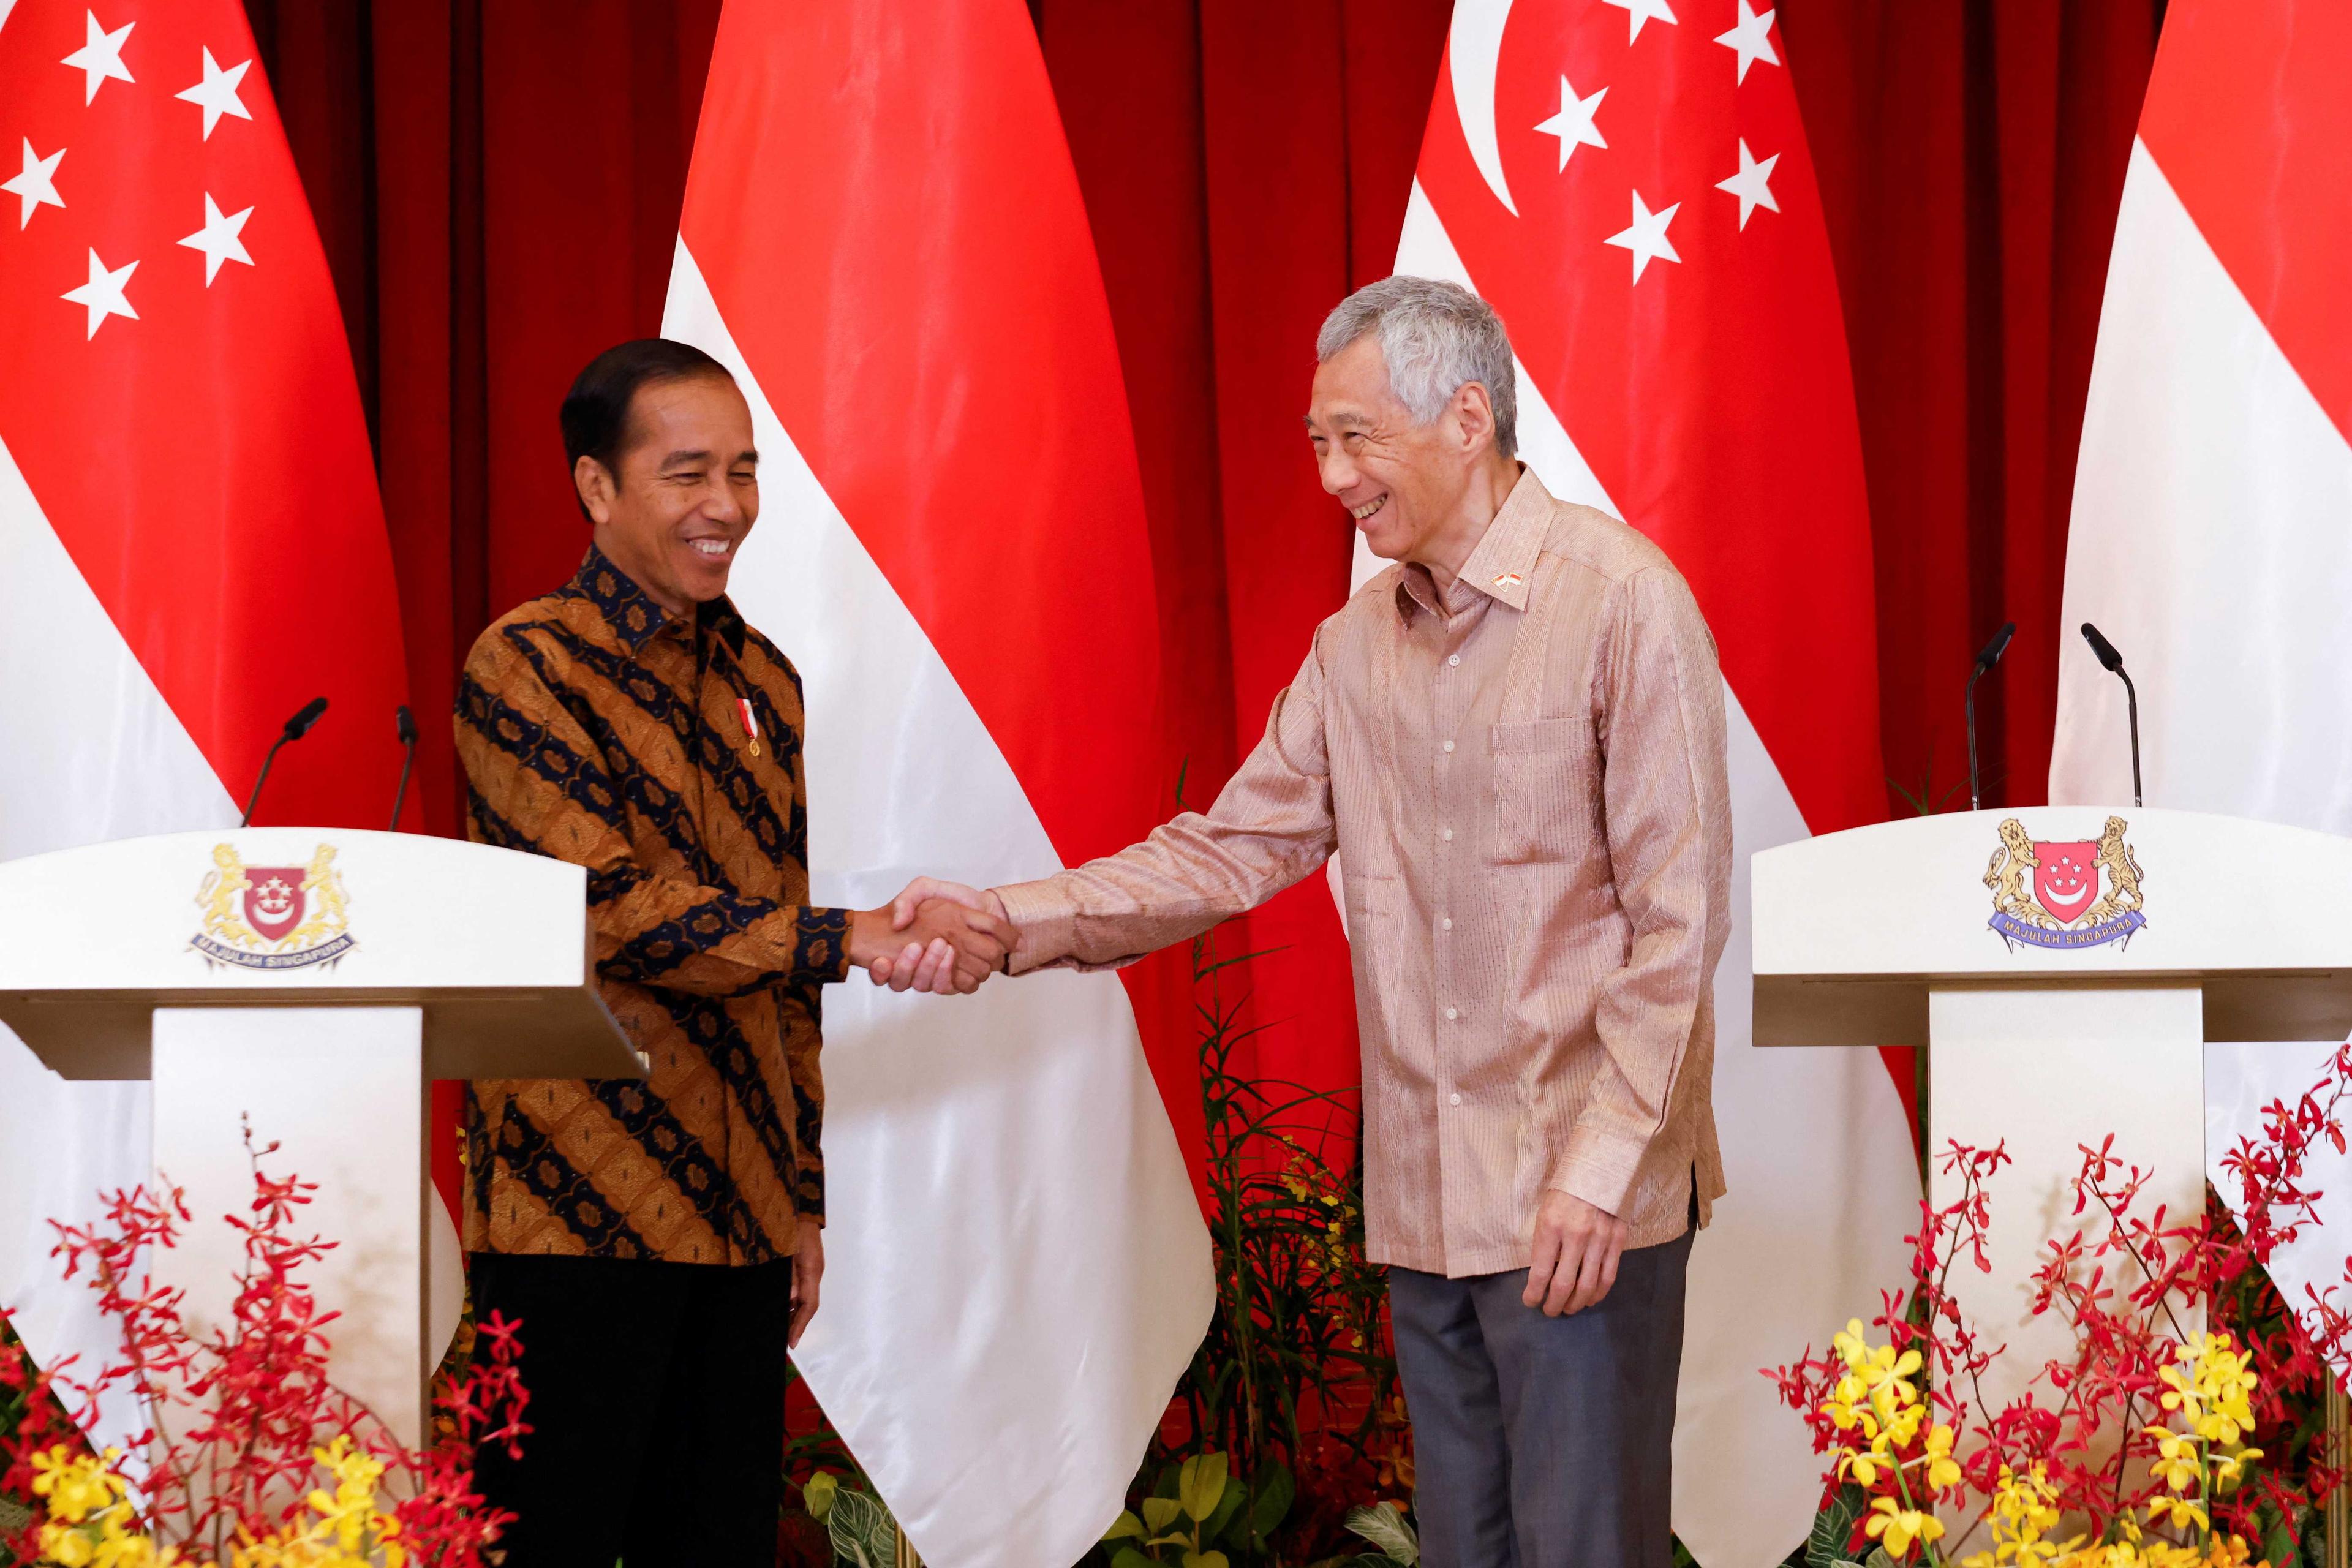 Indonesia's President Joko Widodo and Singapore's Prime Minister Lee Hsien Loong give a joint news conference at the Istana in Singapore March 16. Photo: Reuters